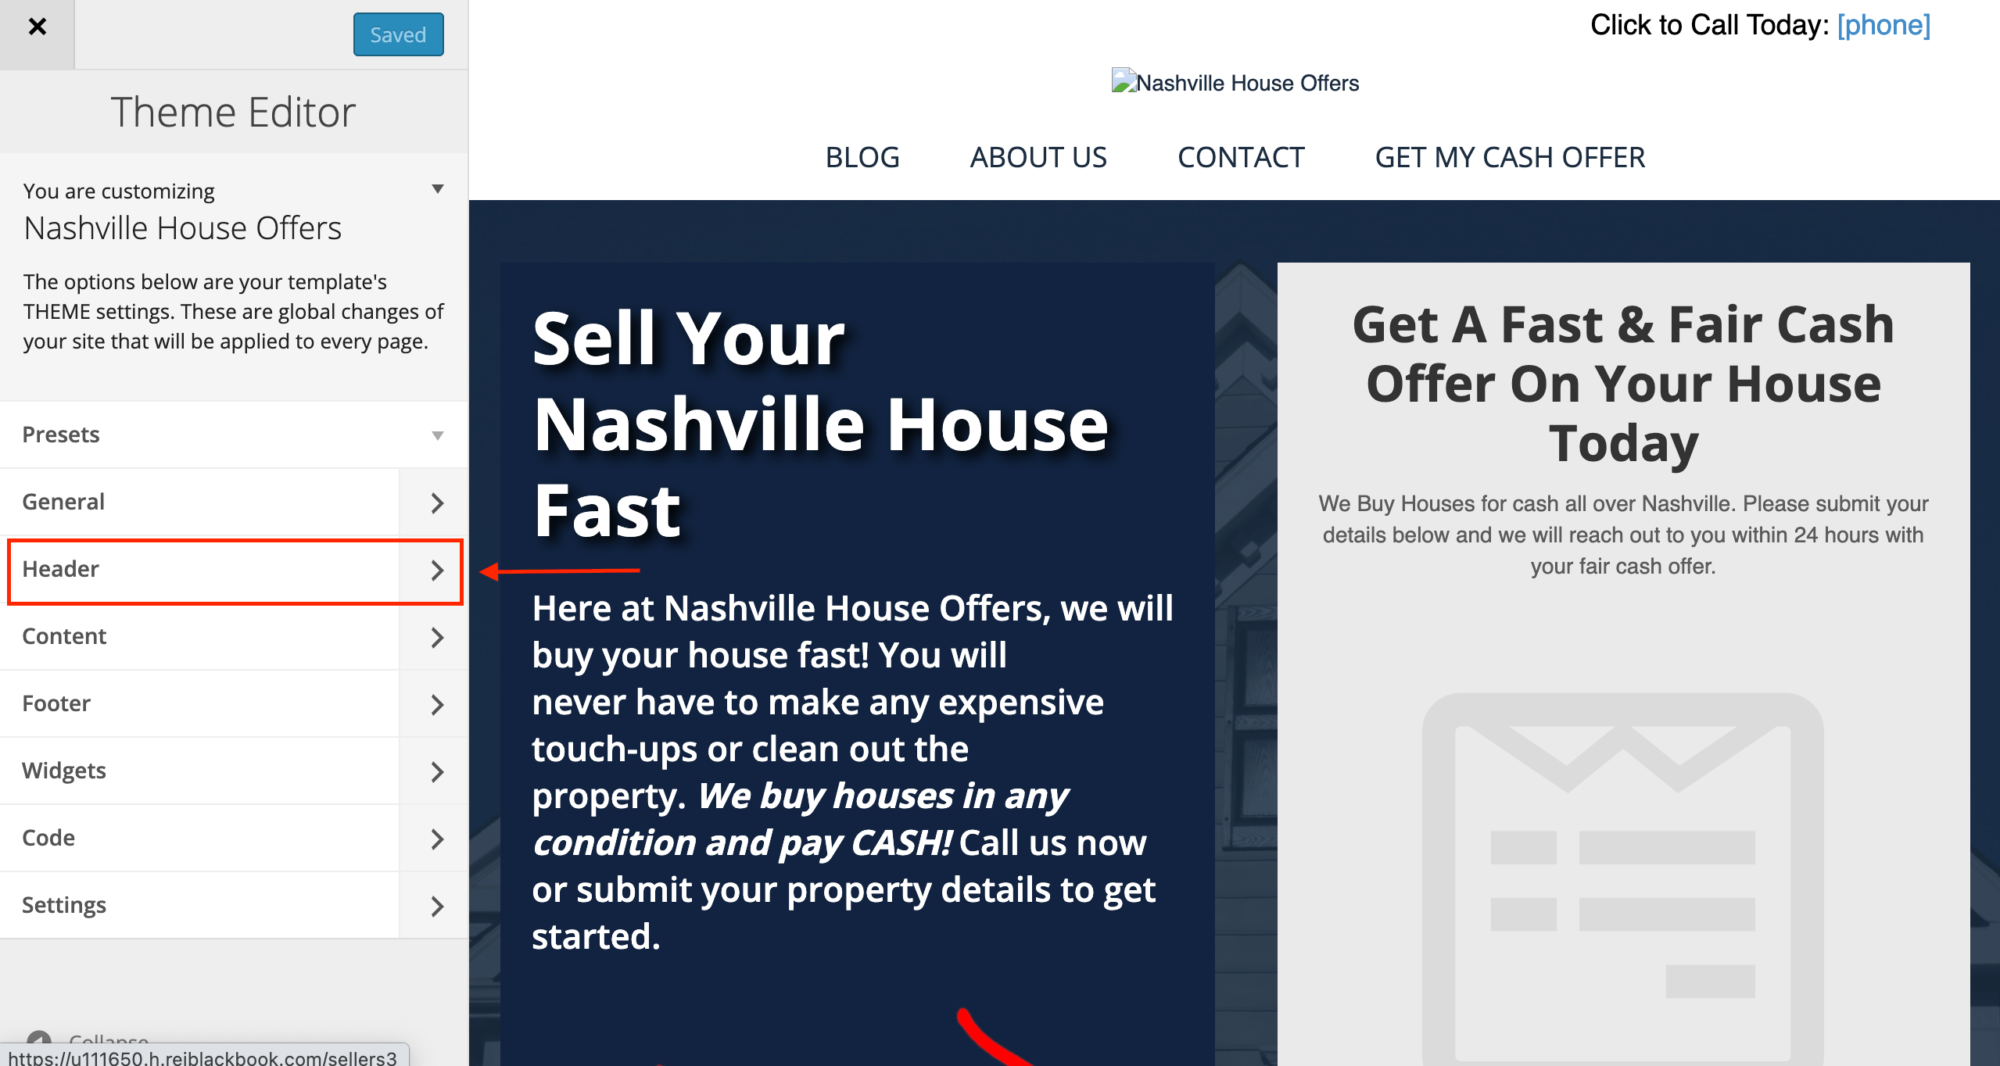 Select "Header" to customize your real estate investor website header.